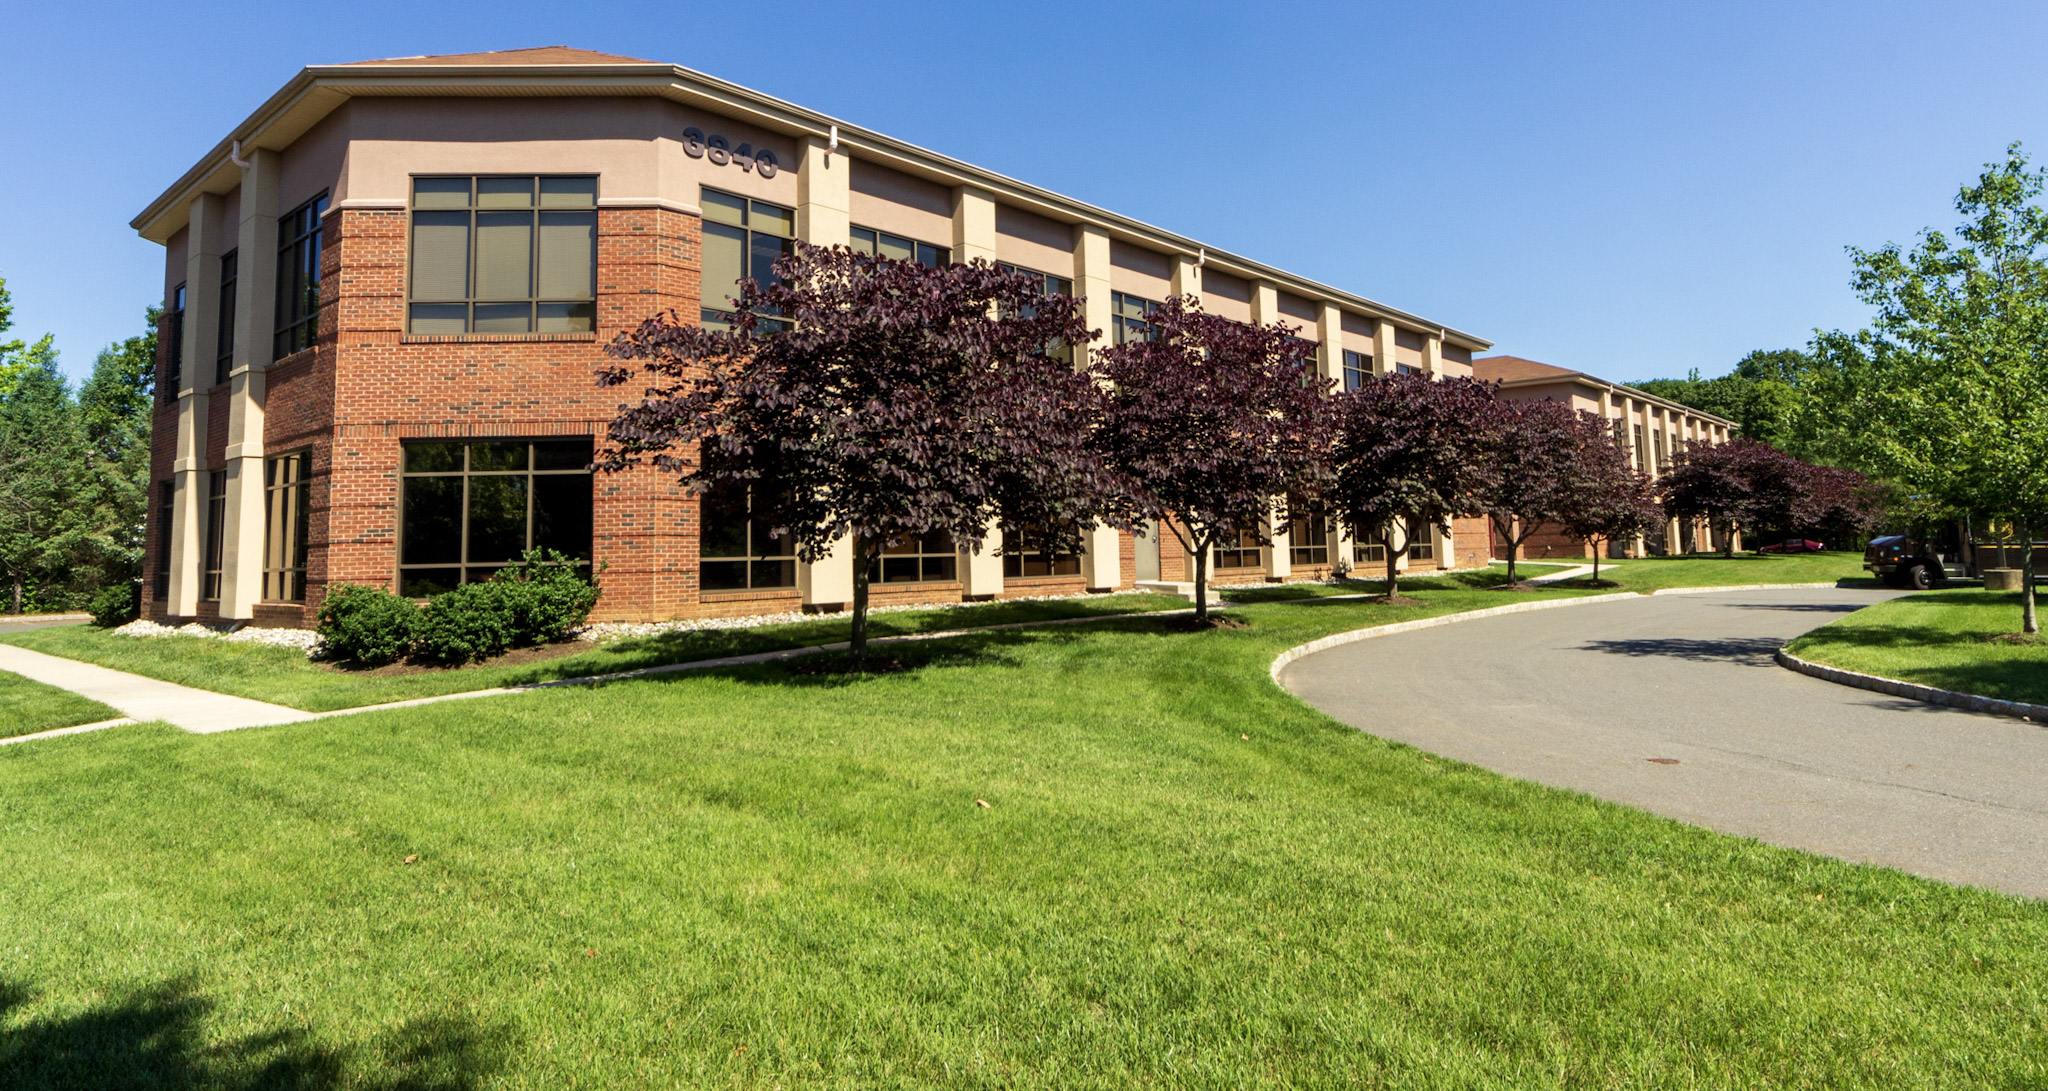 In the News: Fennelly Associates negotiates over 7K sq. ft. of office deals in Hamilton